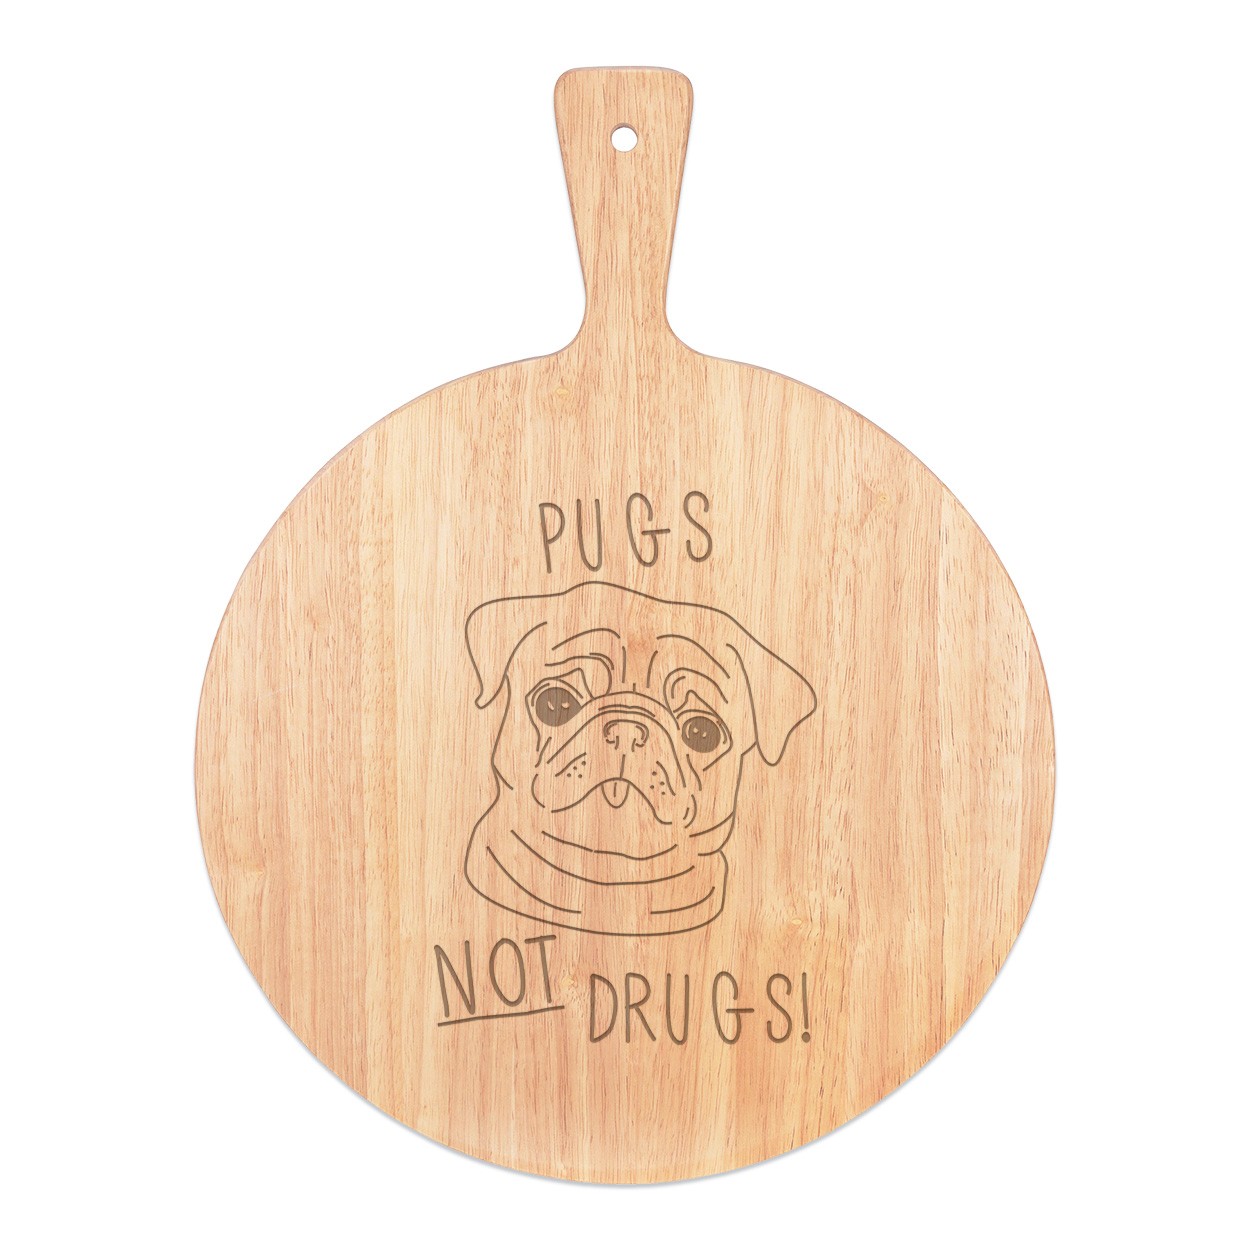 Pugs Not Drugs Pizza Board Paddle Serving Tray Handle Round Wooden 45x34cm